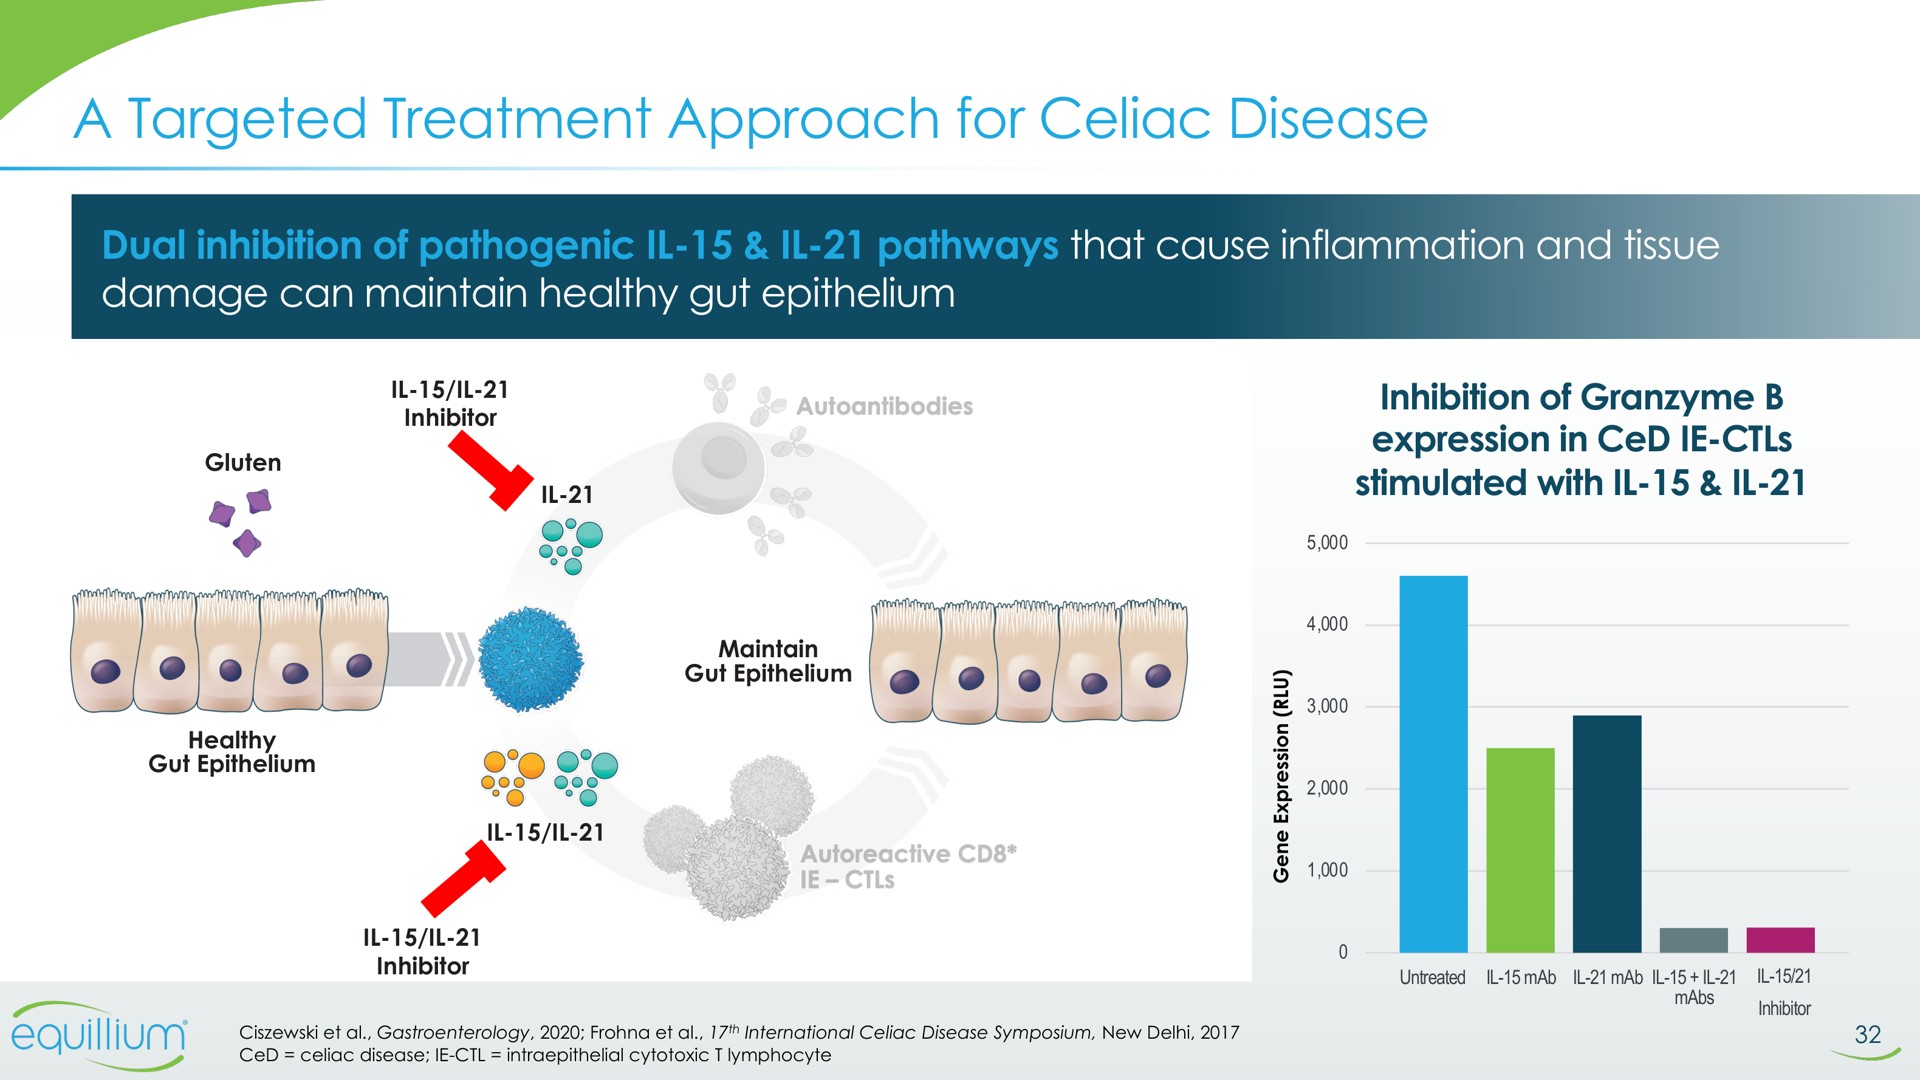 a targeted treatment approach for celiac disease | Equillium